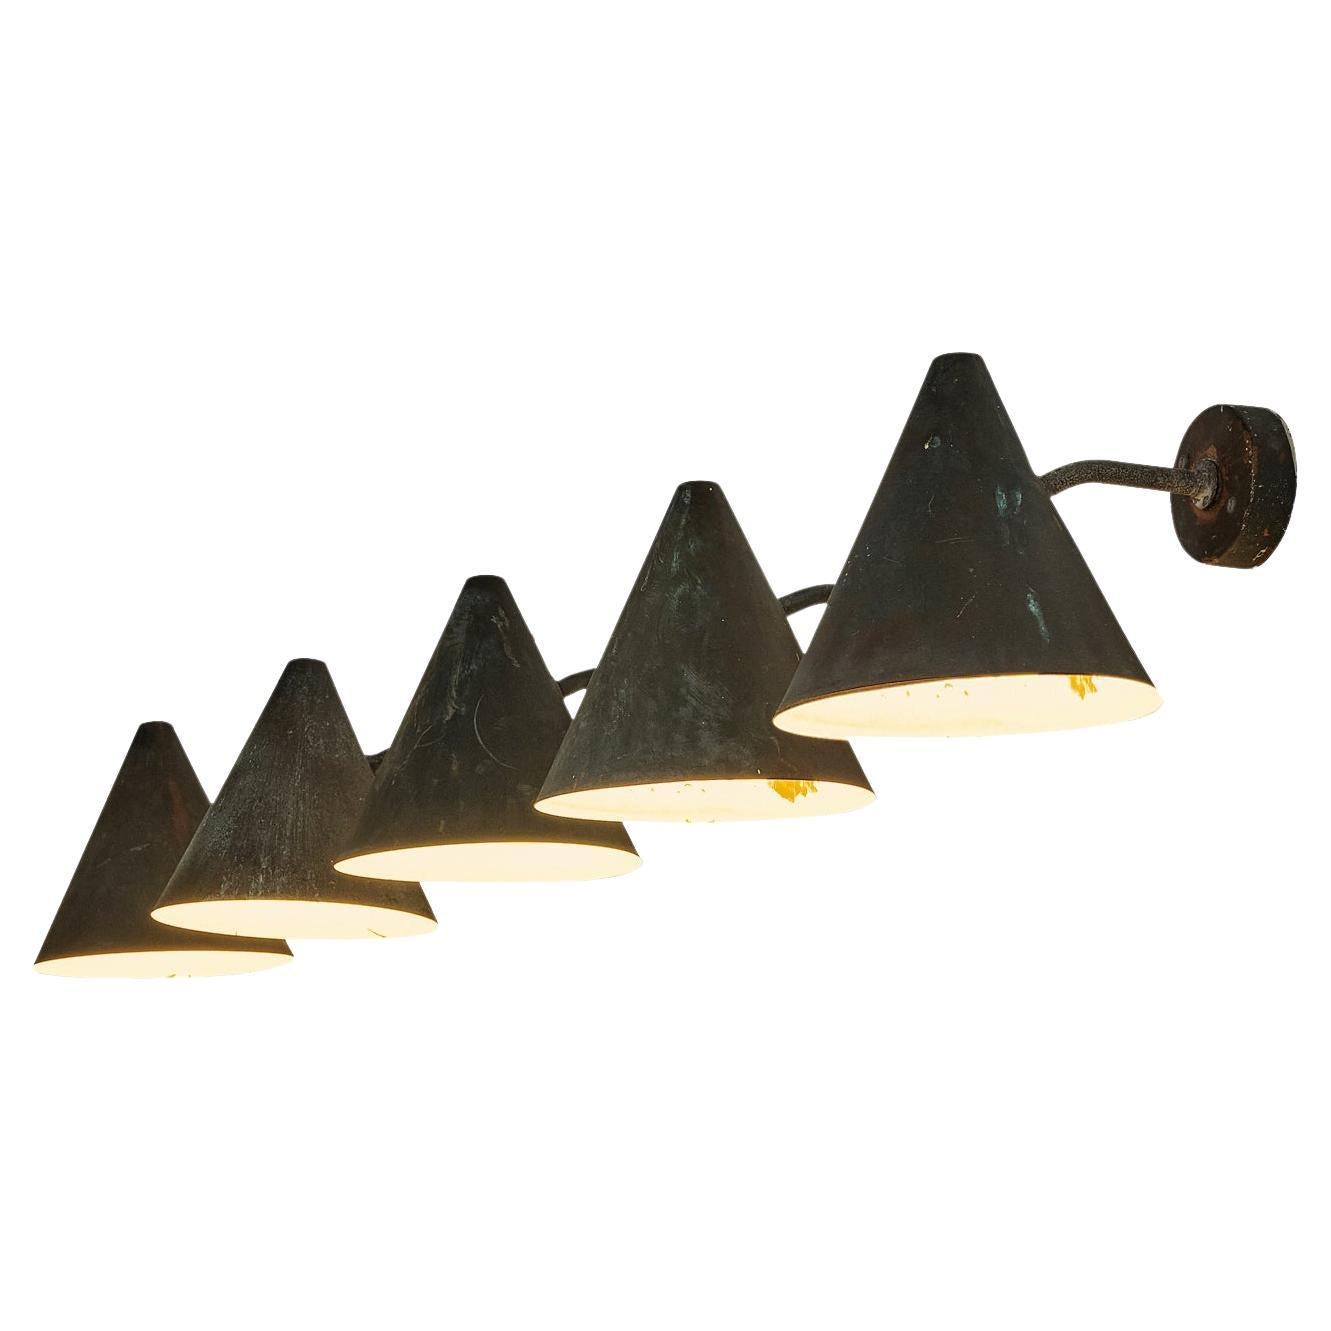  Hans-Agne Jakobsson 'Tratten' Wall Lights in Patinated Copper For Sale